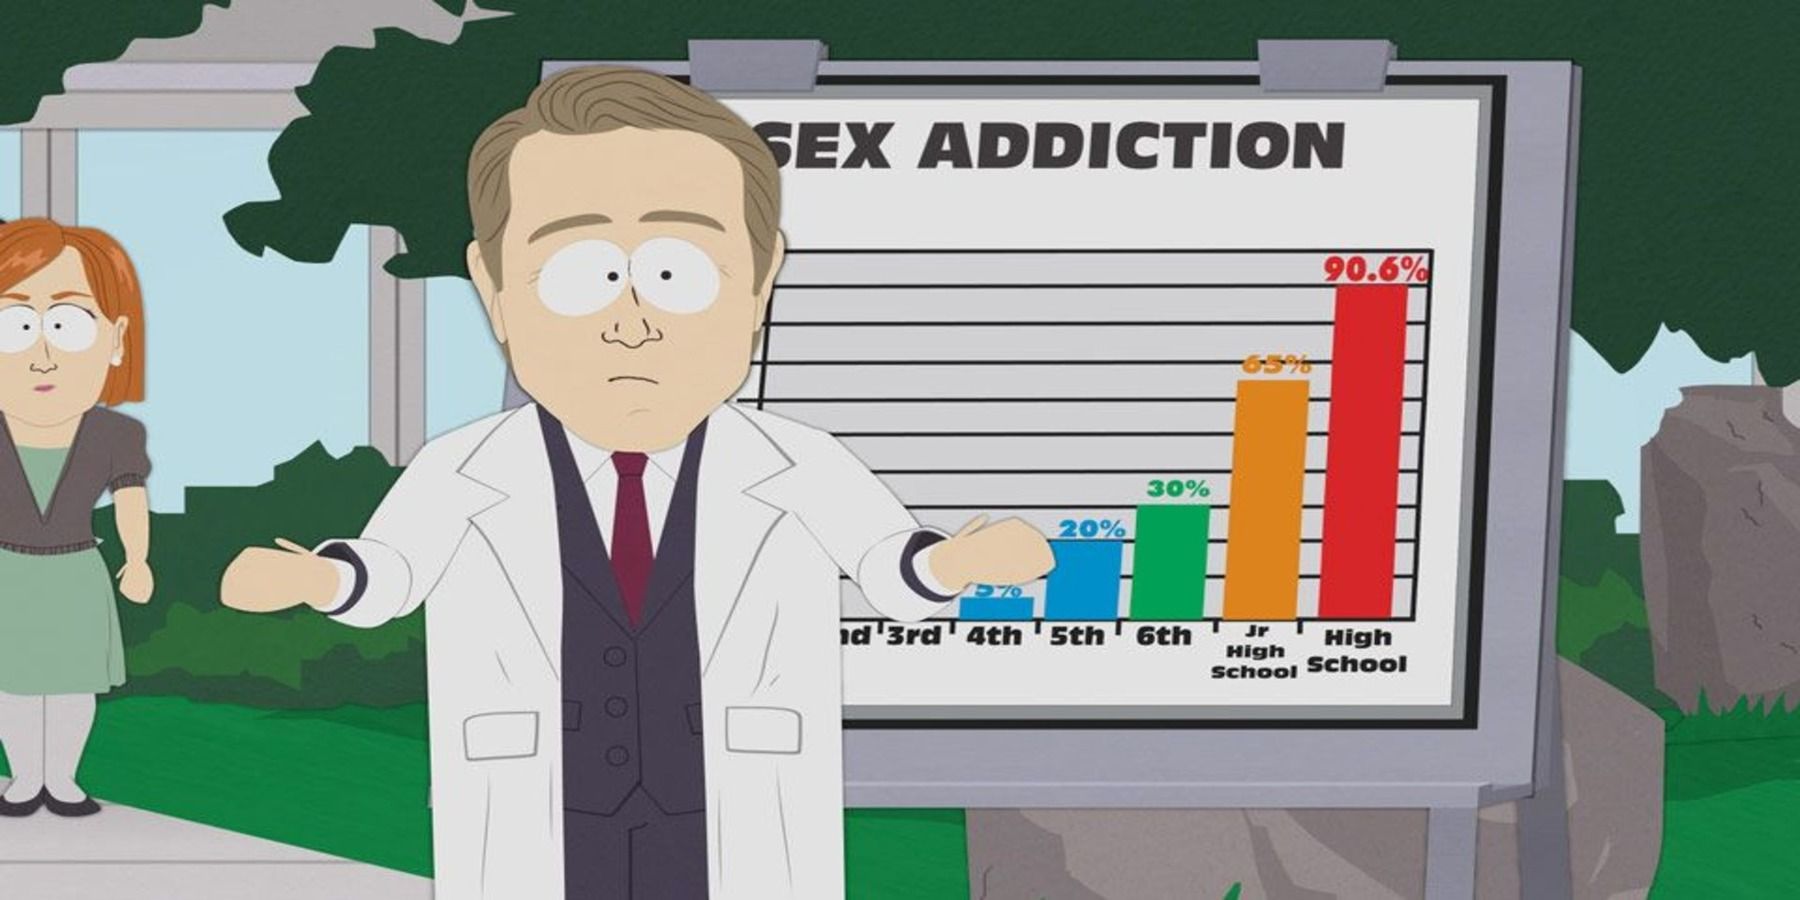 South Park Season 14 Sexual Healing doctor with sex addiction chart